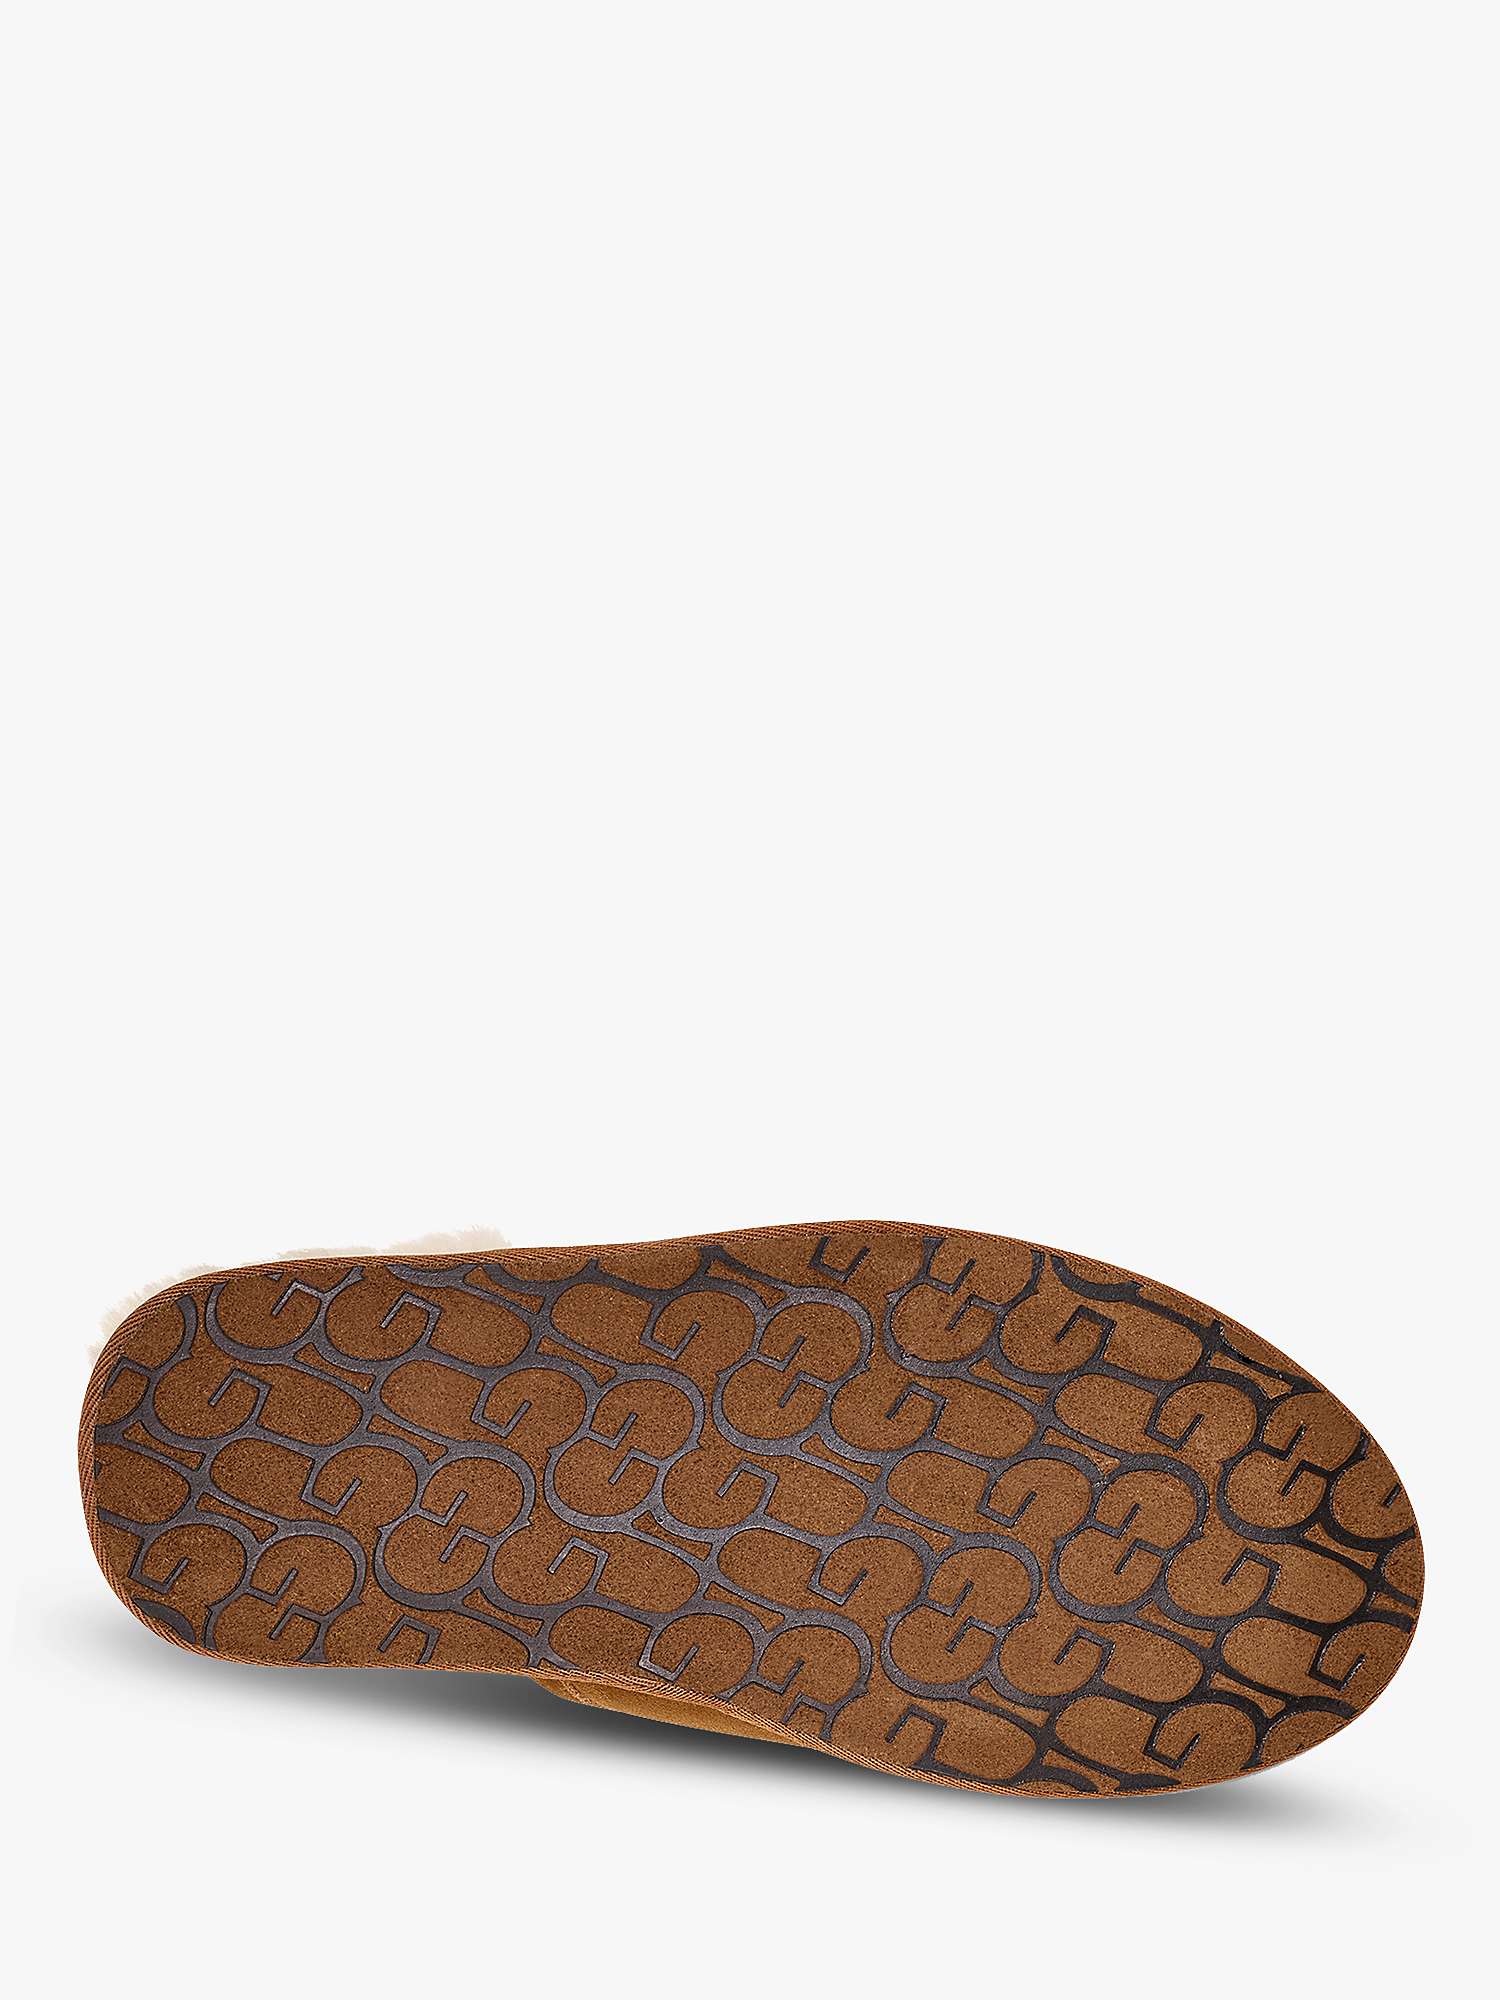 Buy UGG Scuff Mule Suede Slippers Online at johnlewis.com